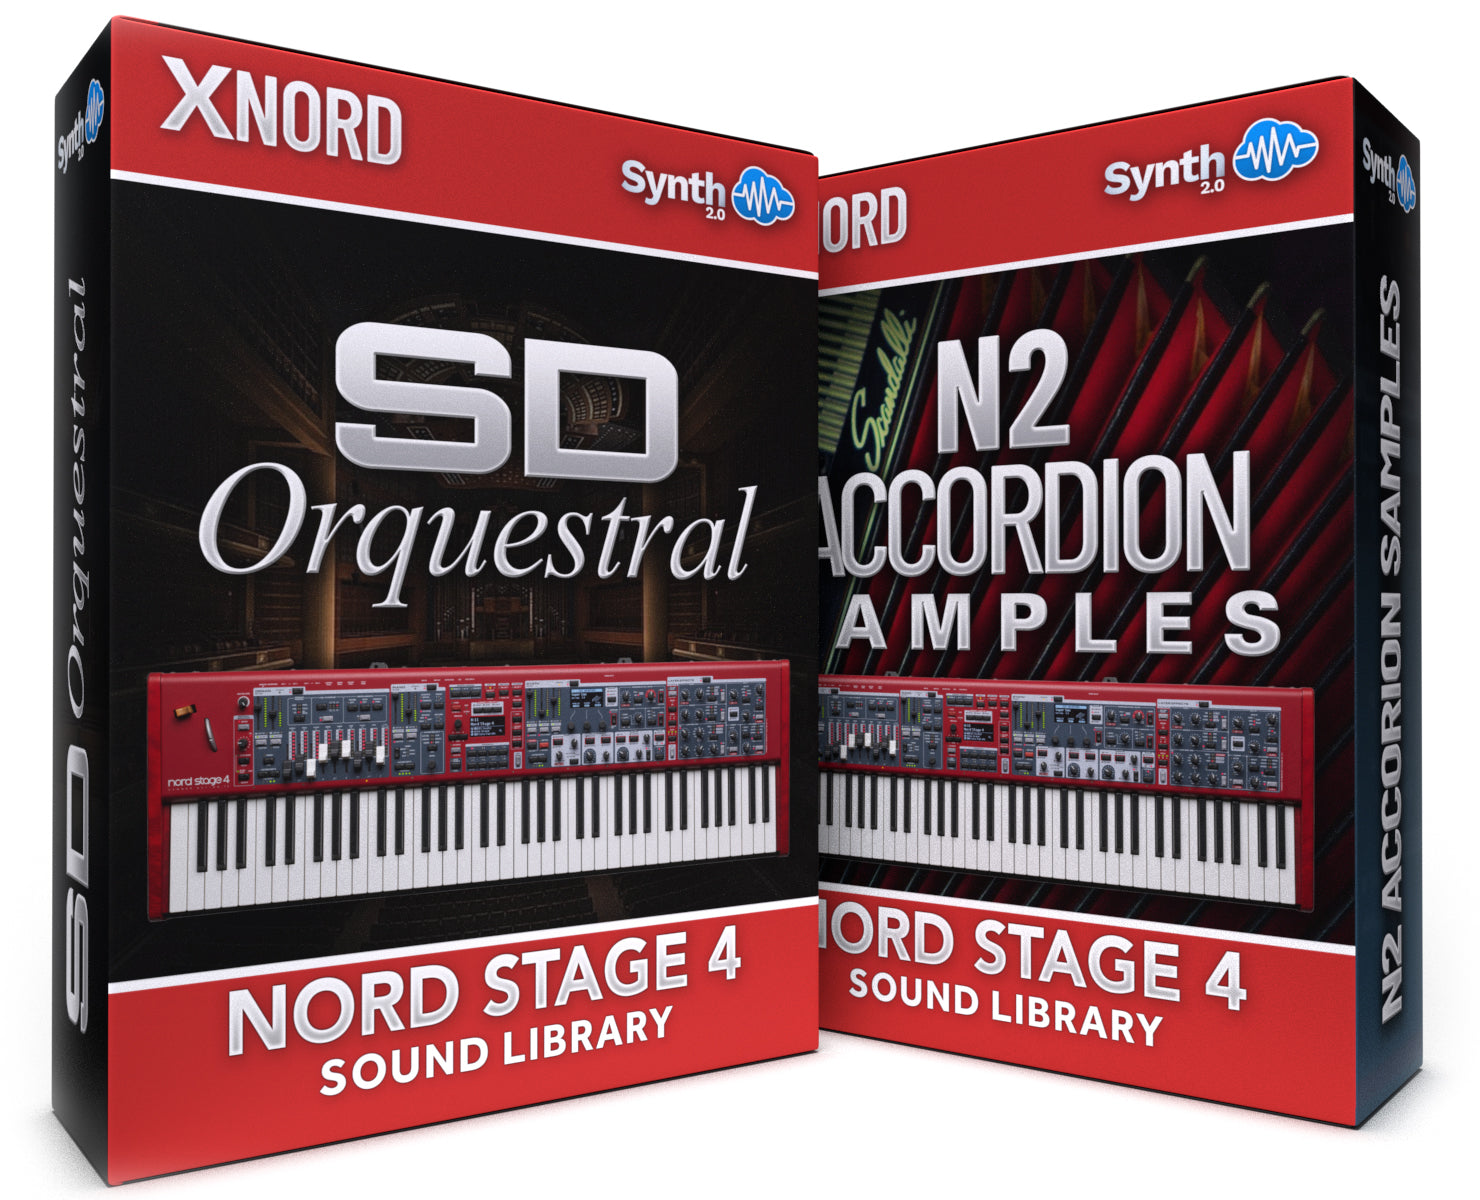 SCL419 - ( Bundle ) - SD Orquestral + N2 Accordion Samples - Nord Stage 4